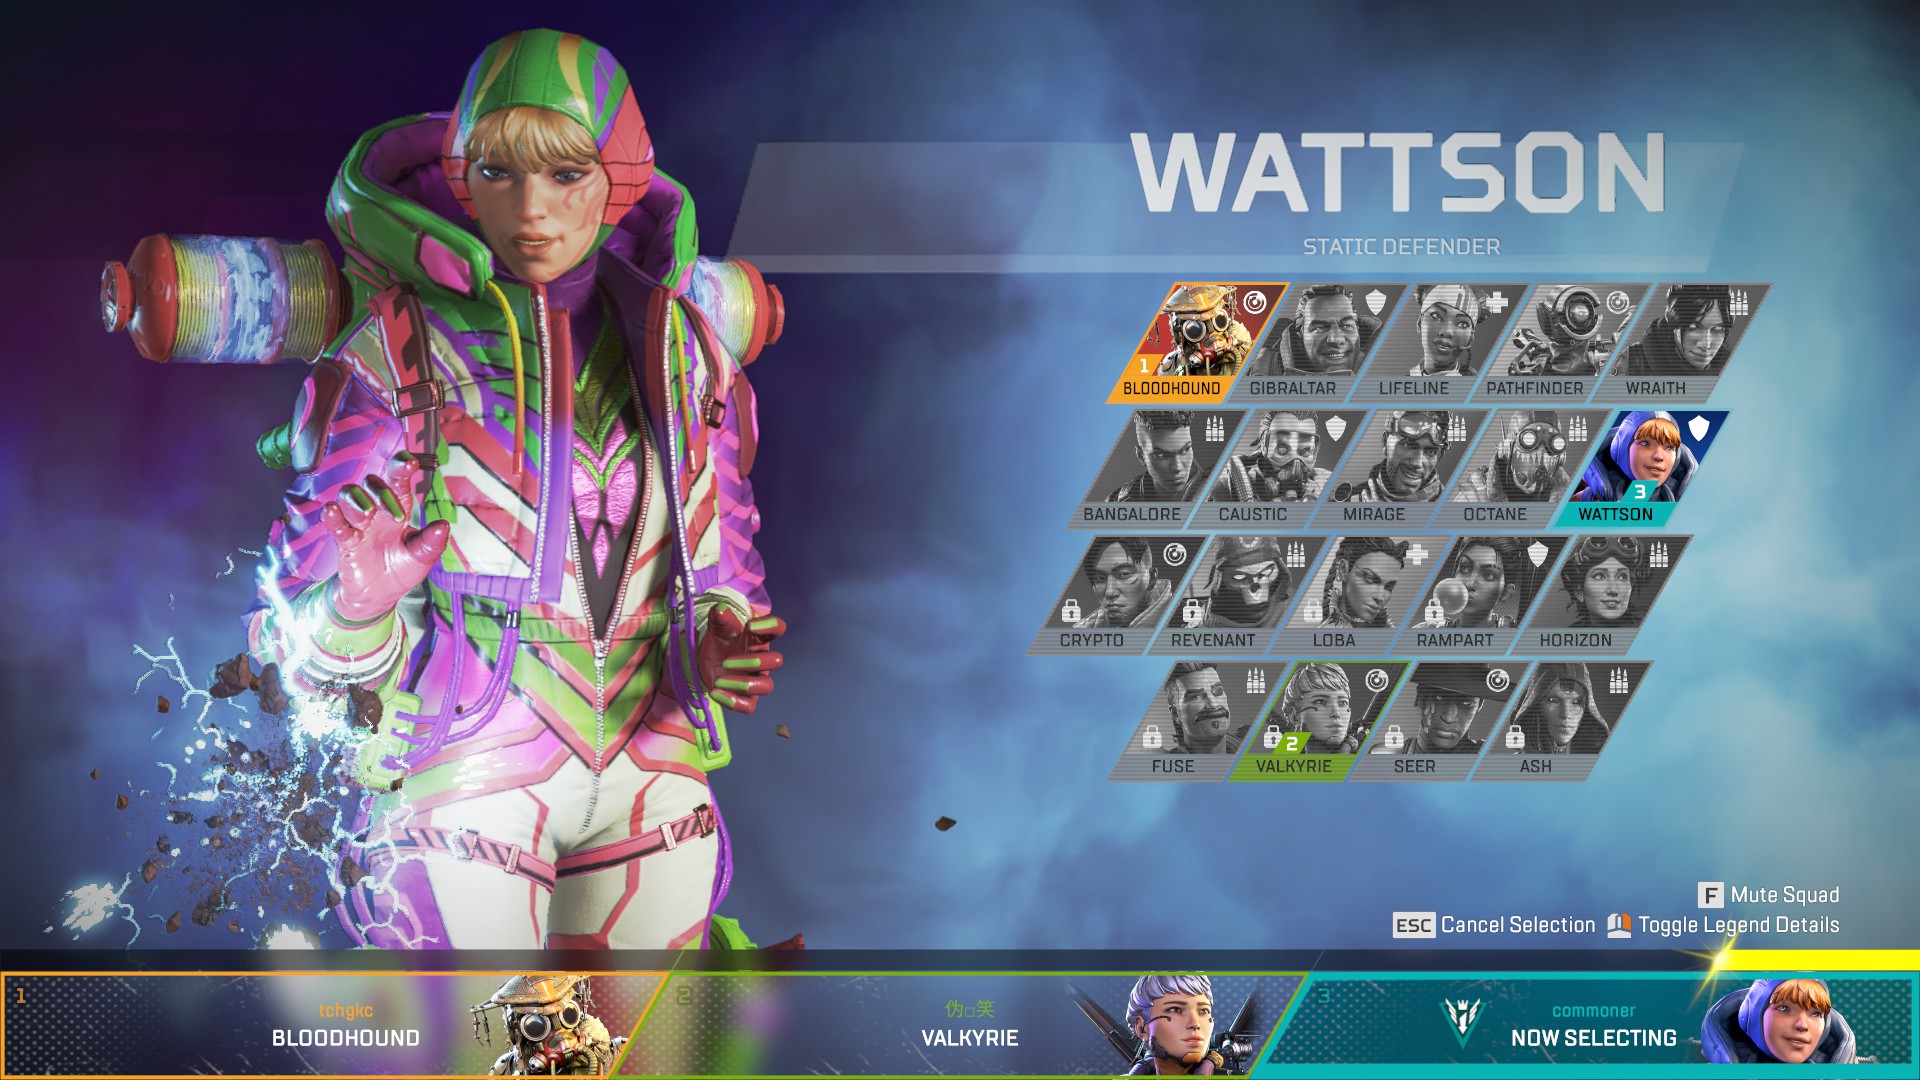 How to Play As Wattson in Apex Legends (Season 11)